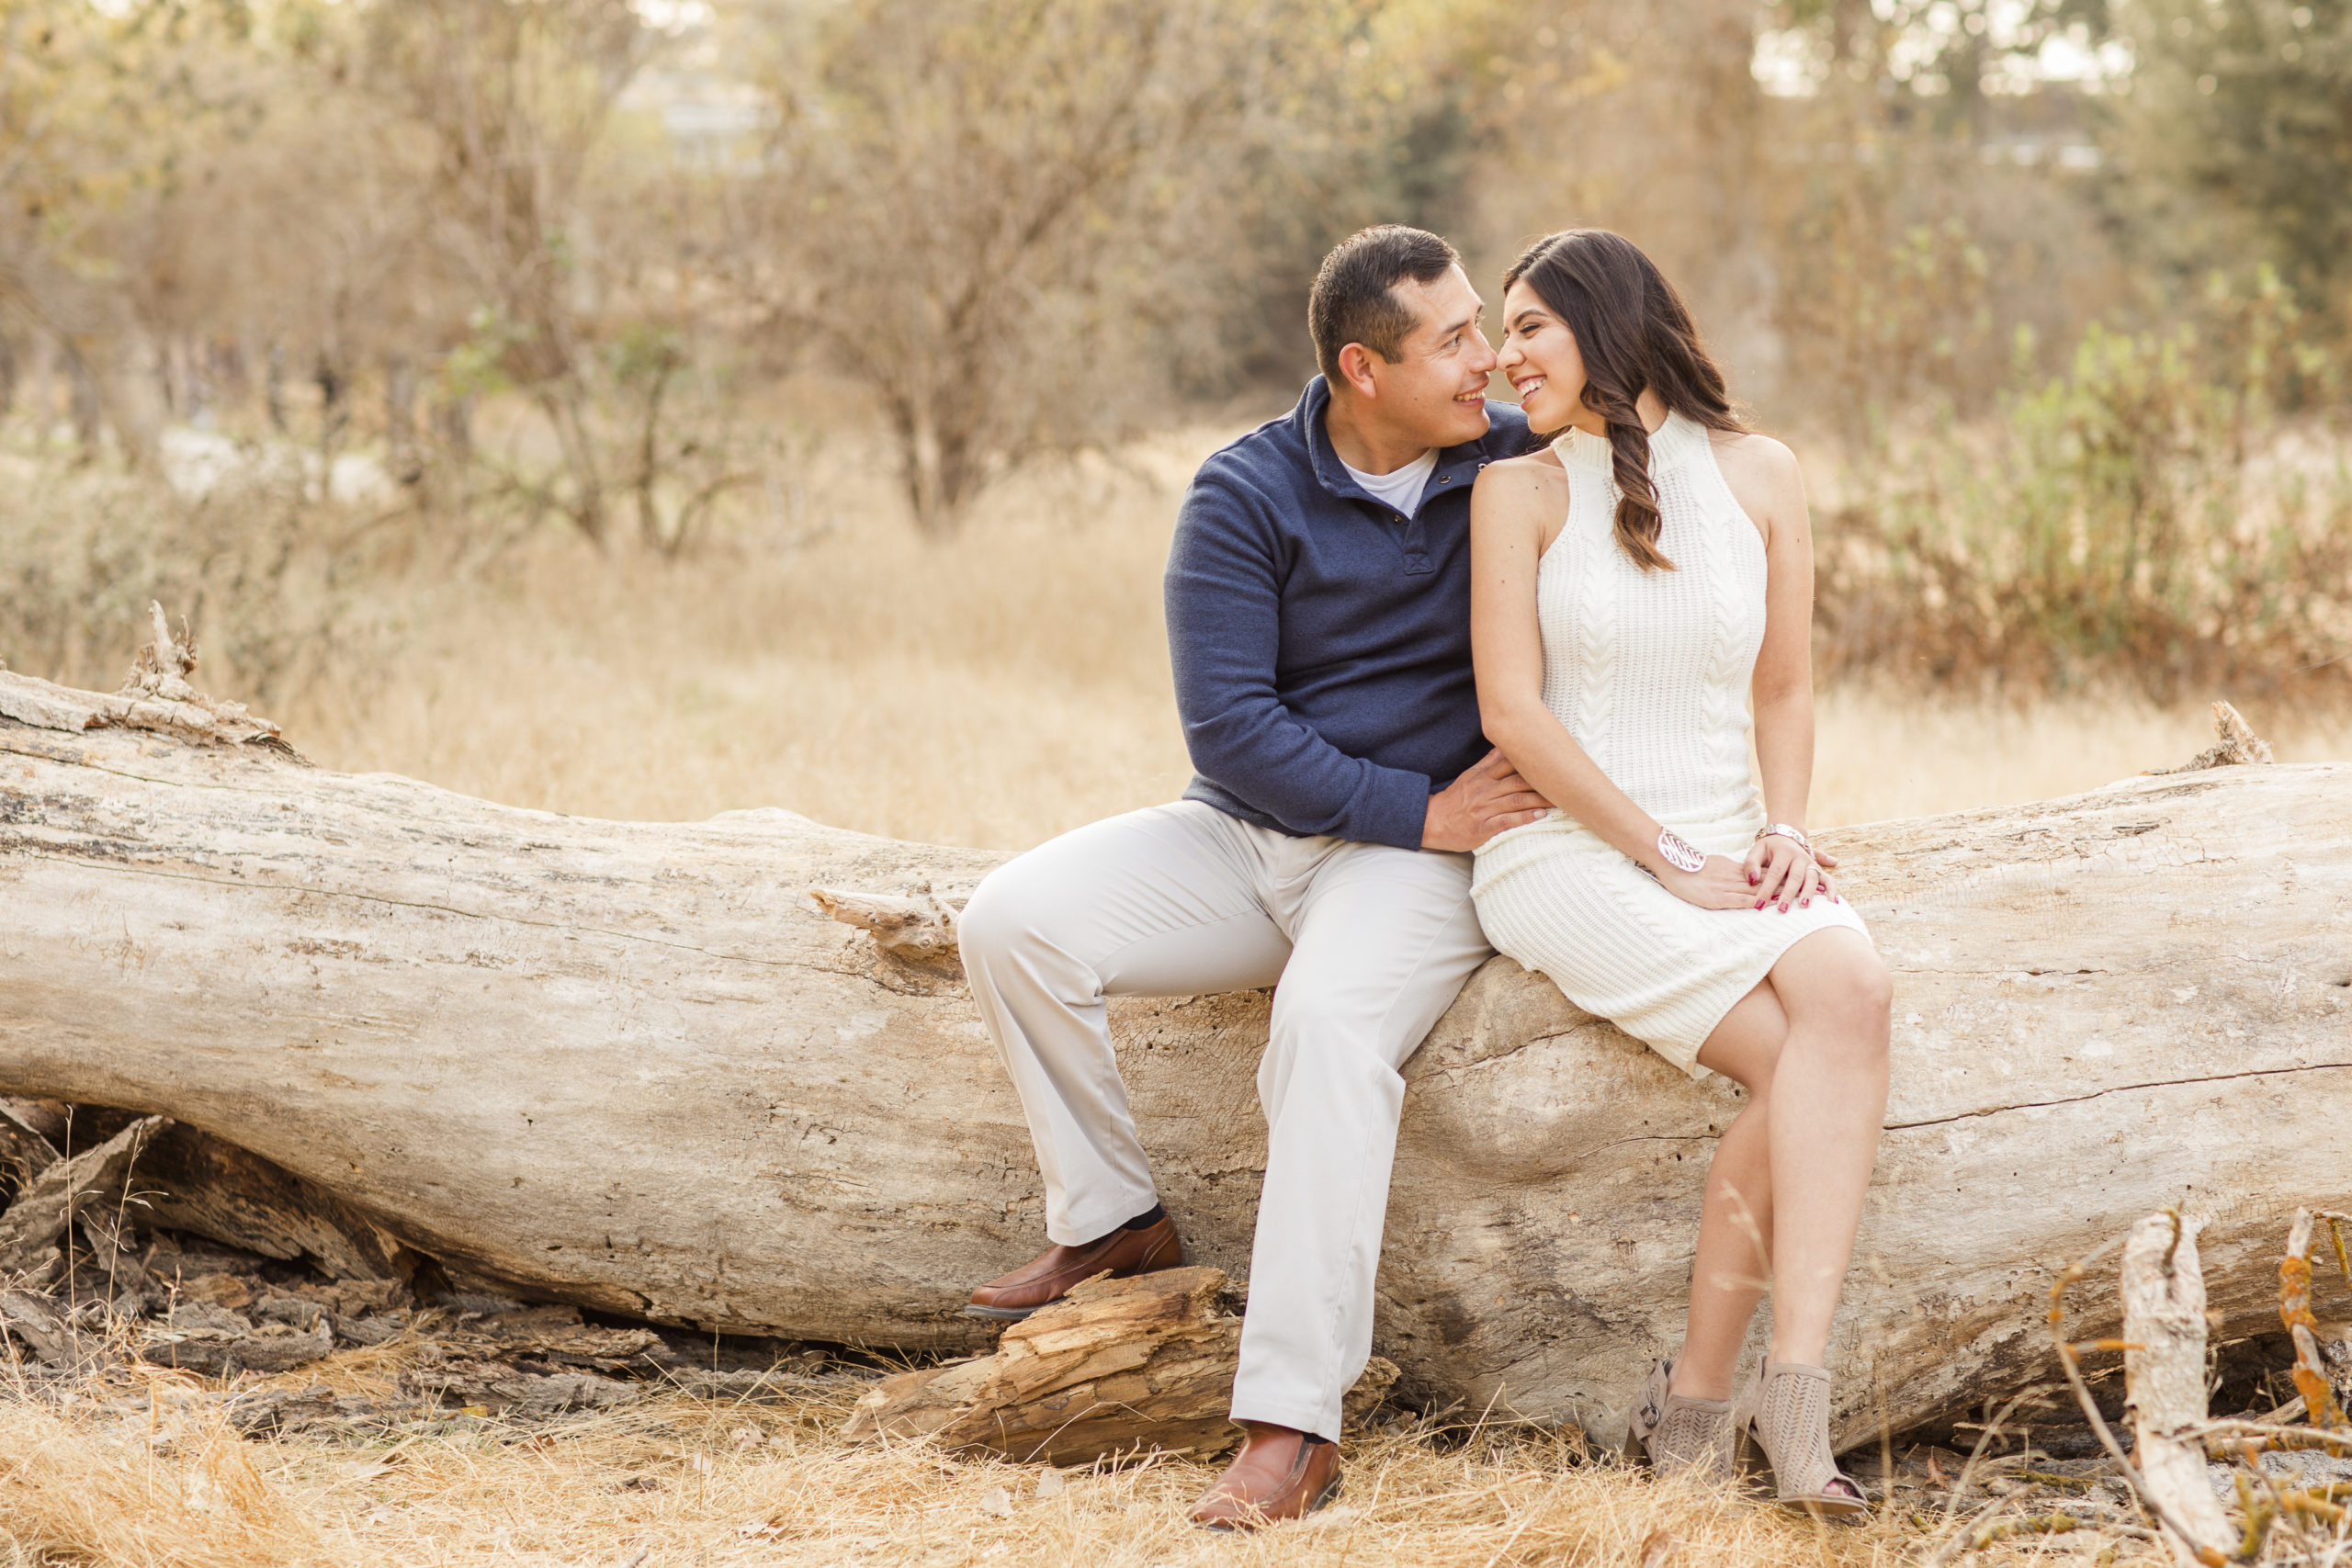 choosing engagement outfits for couple sitting on log